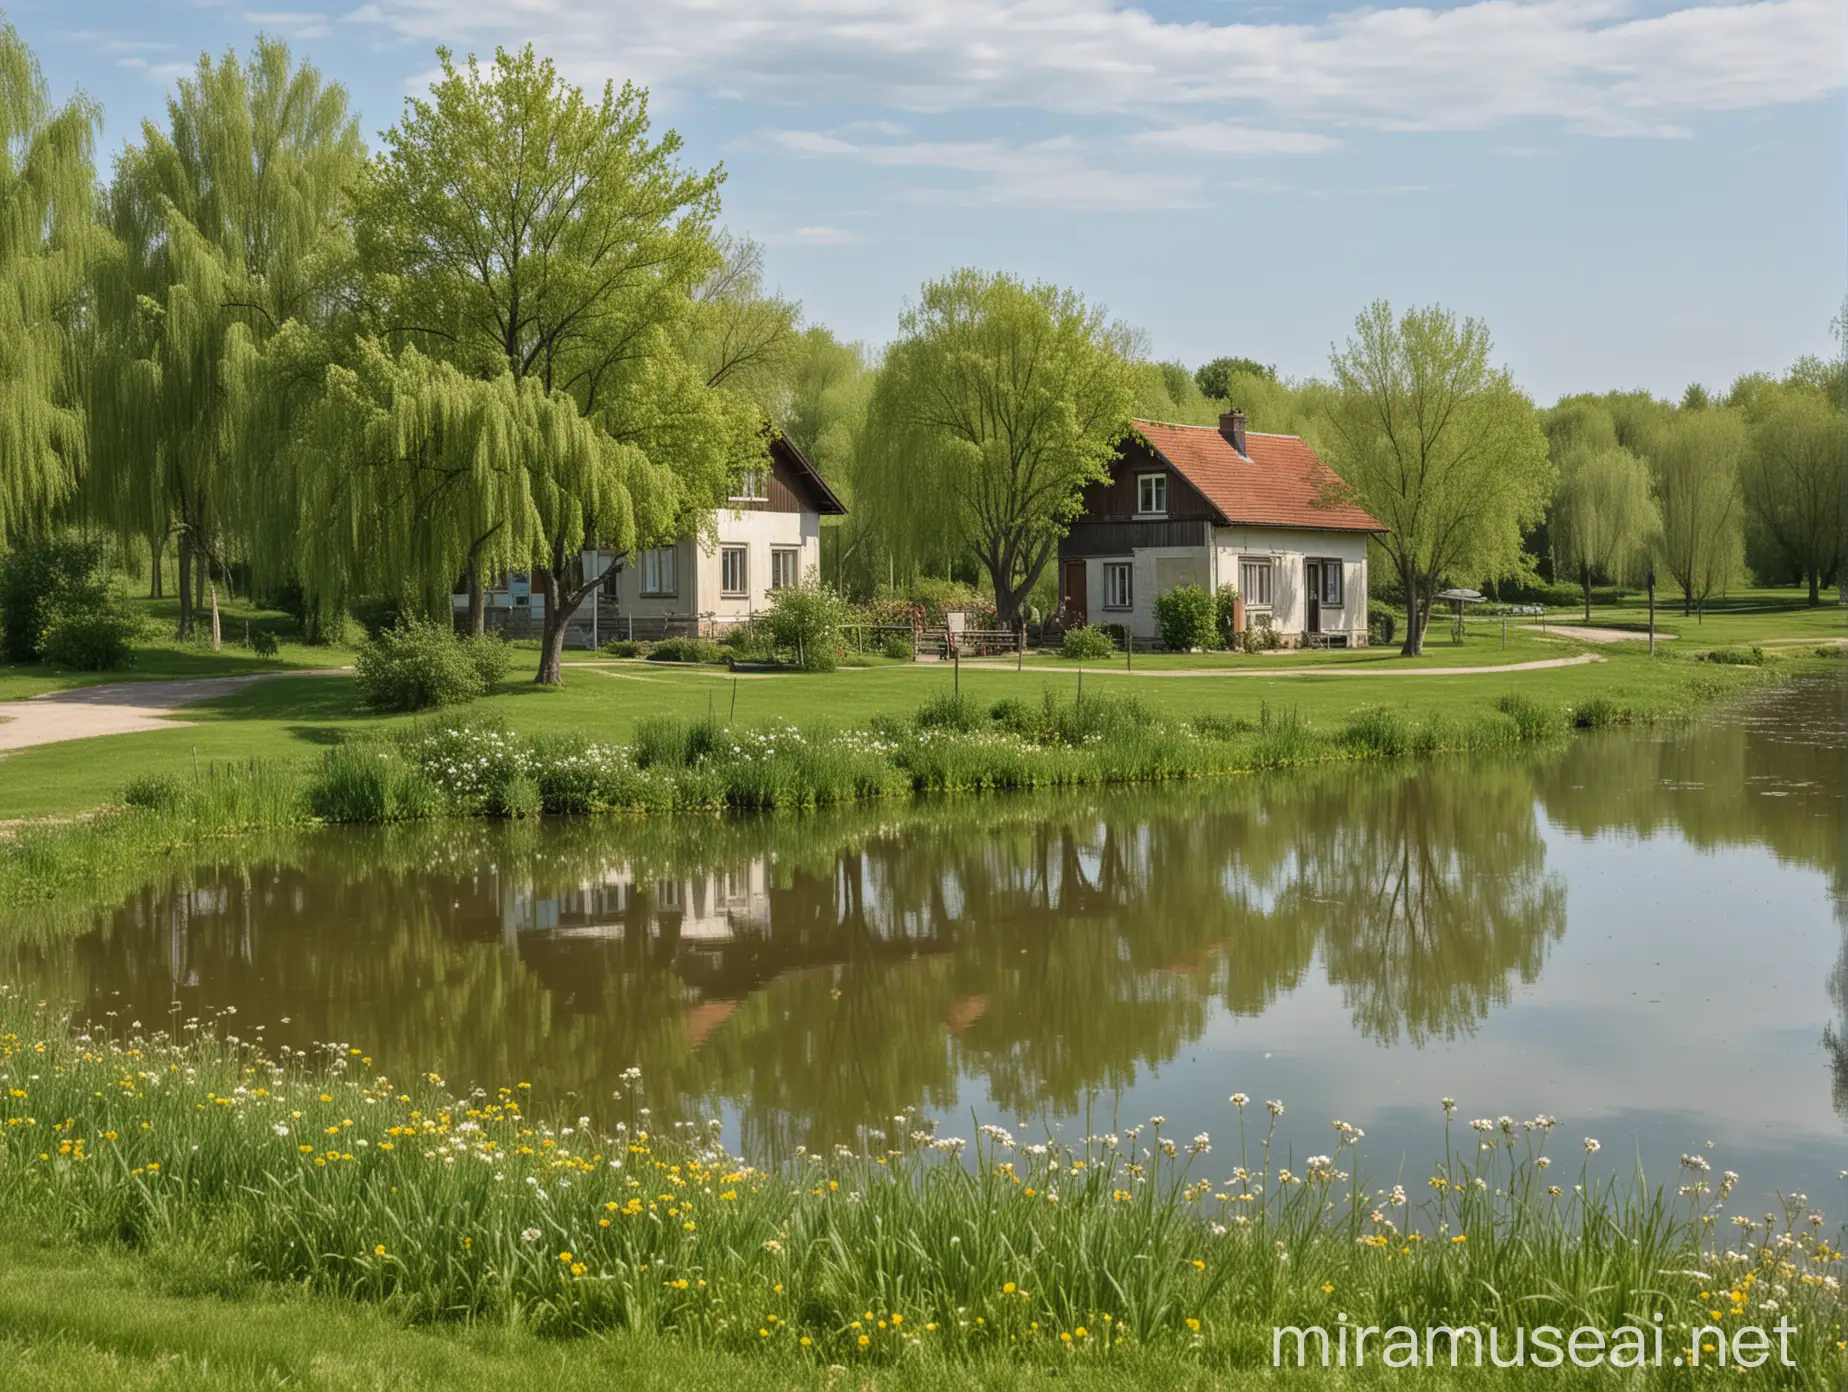 spring, rural area, a few green trees alone, a house in the distance, a few flowers, small lake